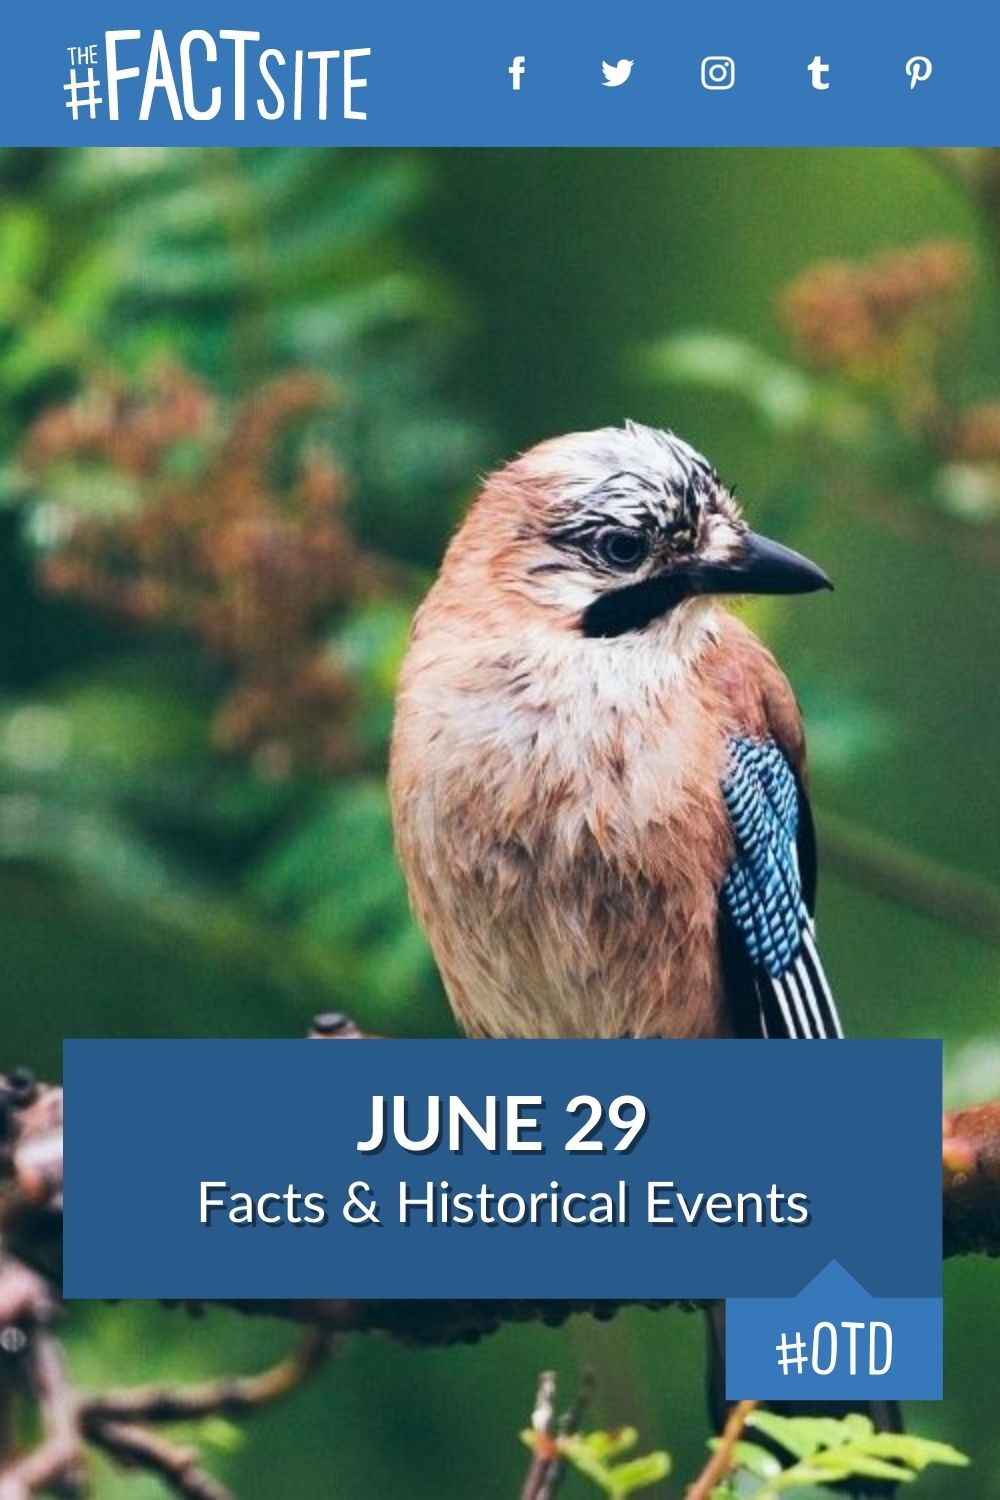 June 29: Facts & Historical Events On This Day